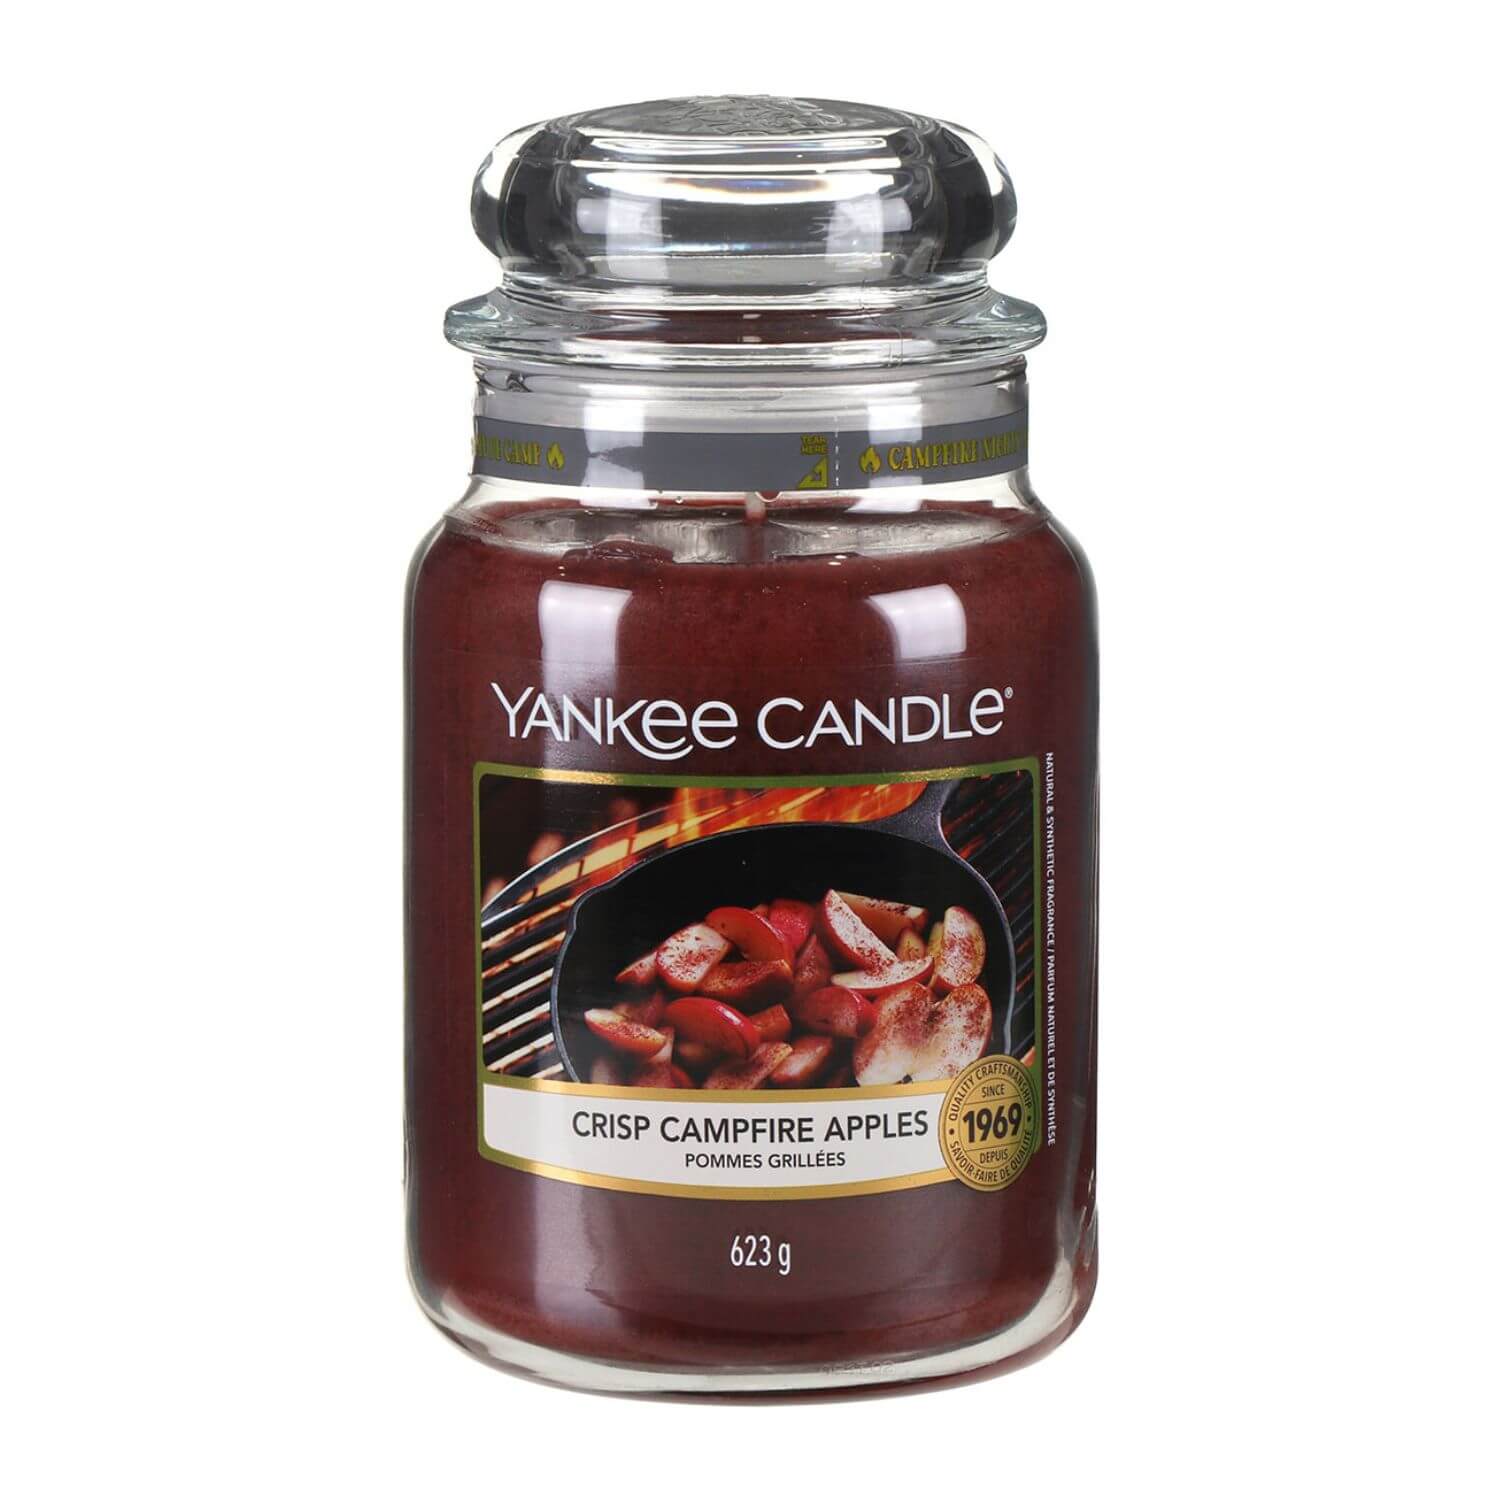 Yankee Candle Crisp Campfire Apples Candle Large Jar 1 Shaws Department Stores